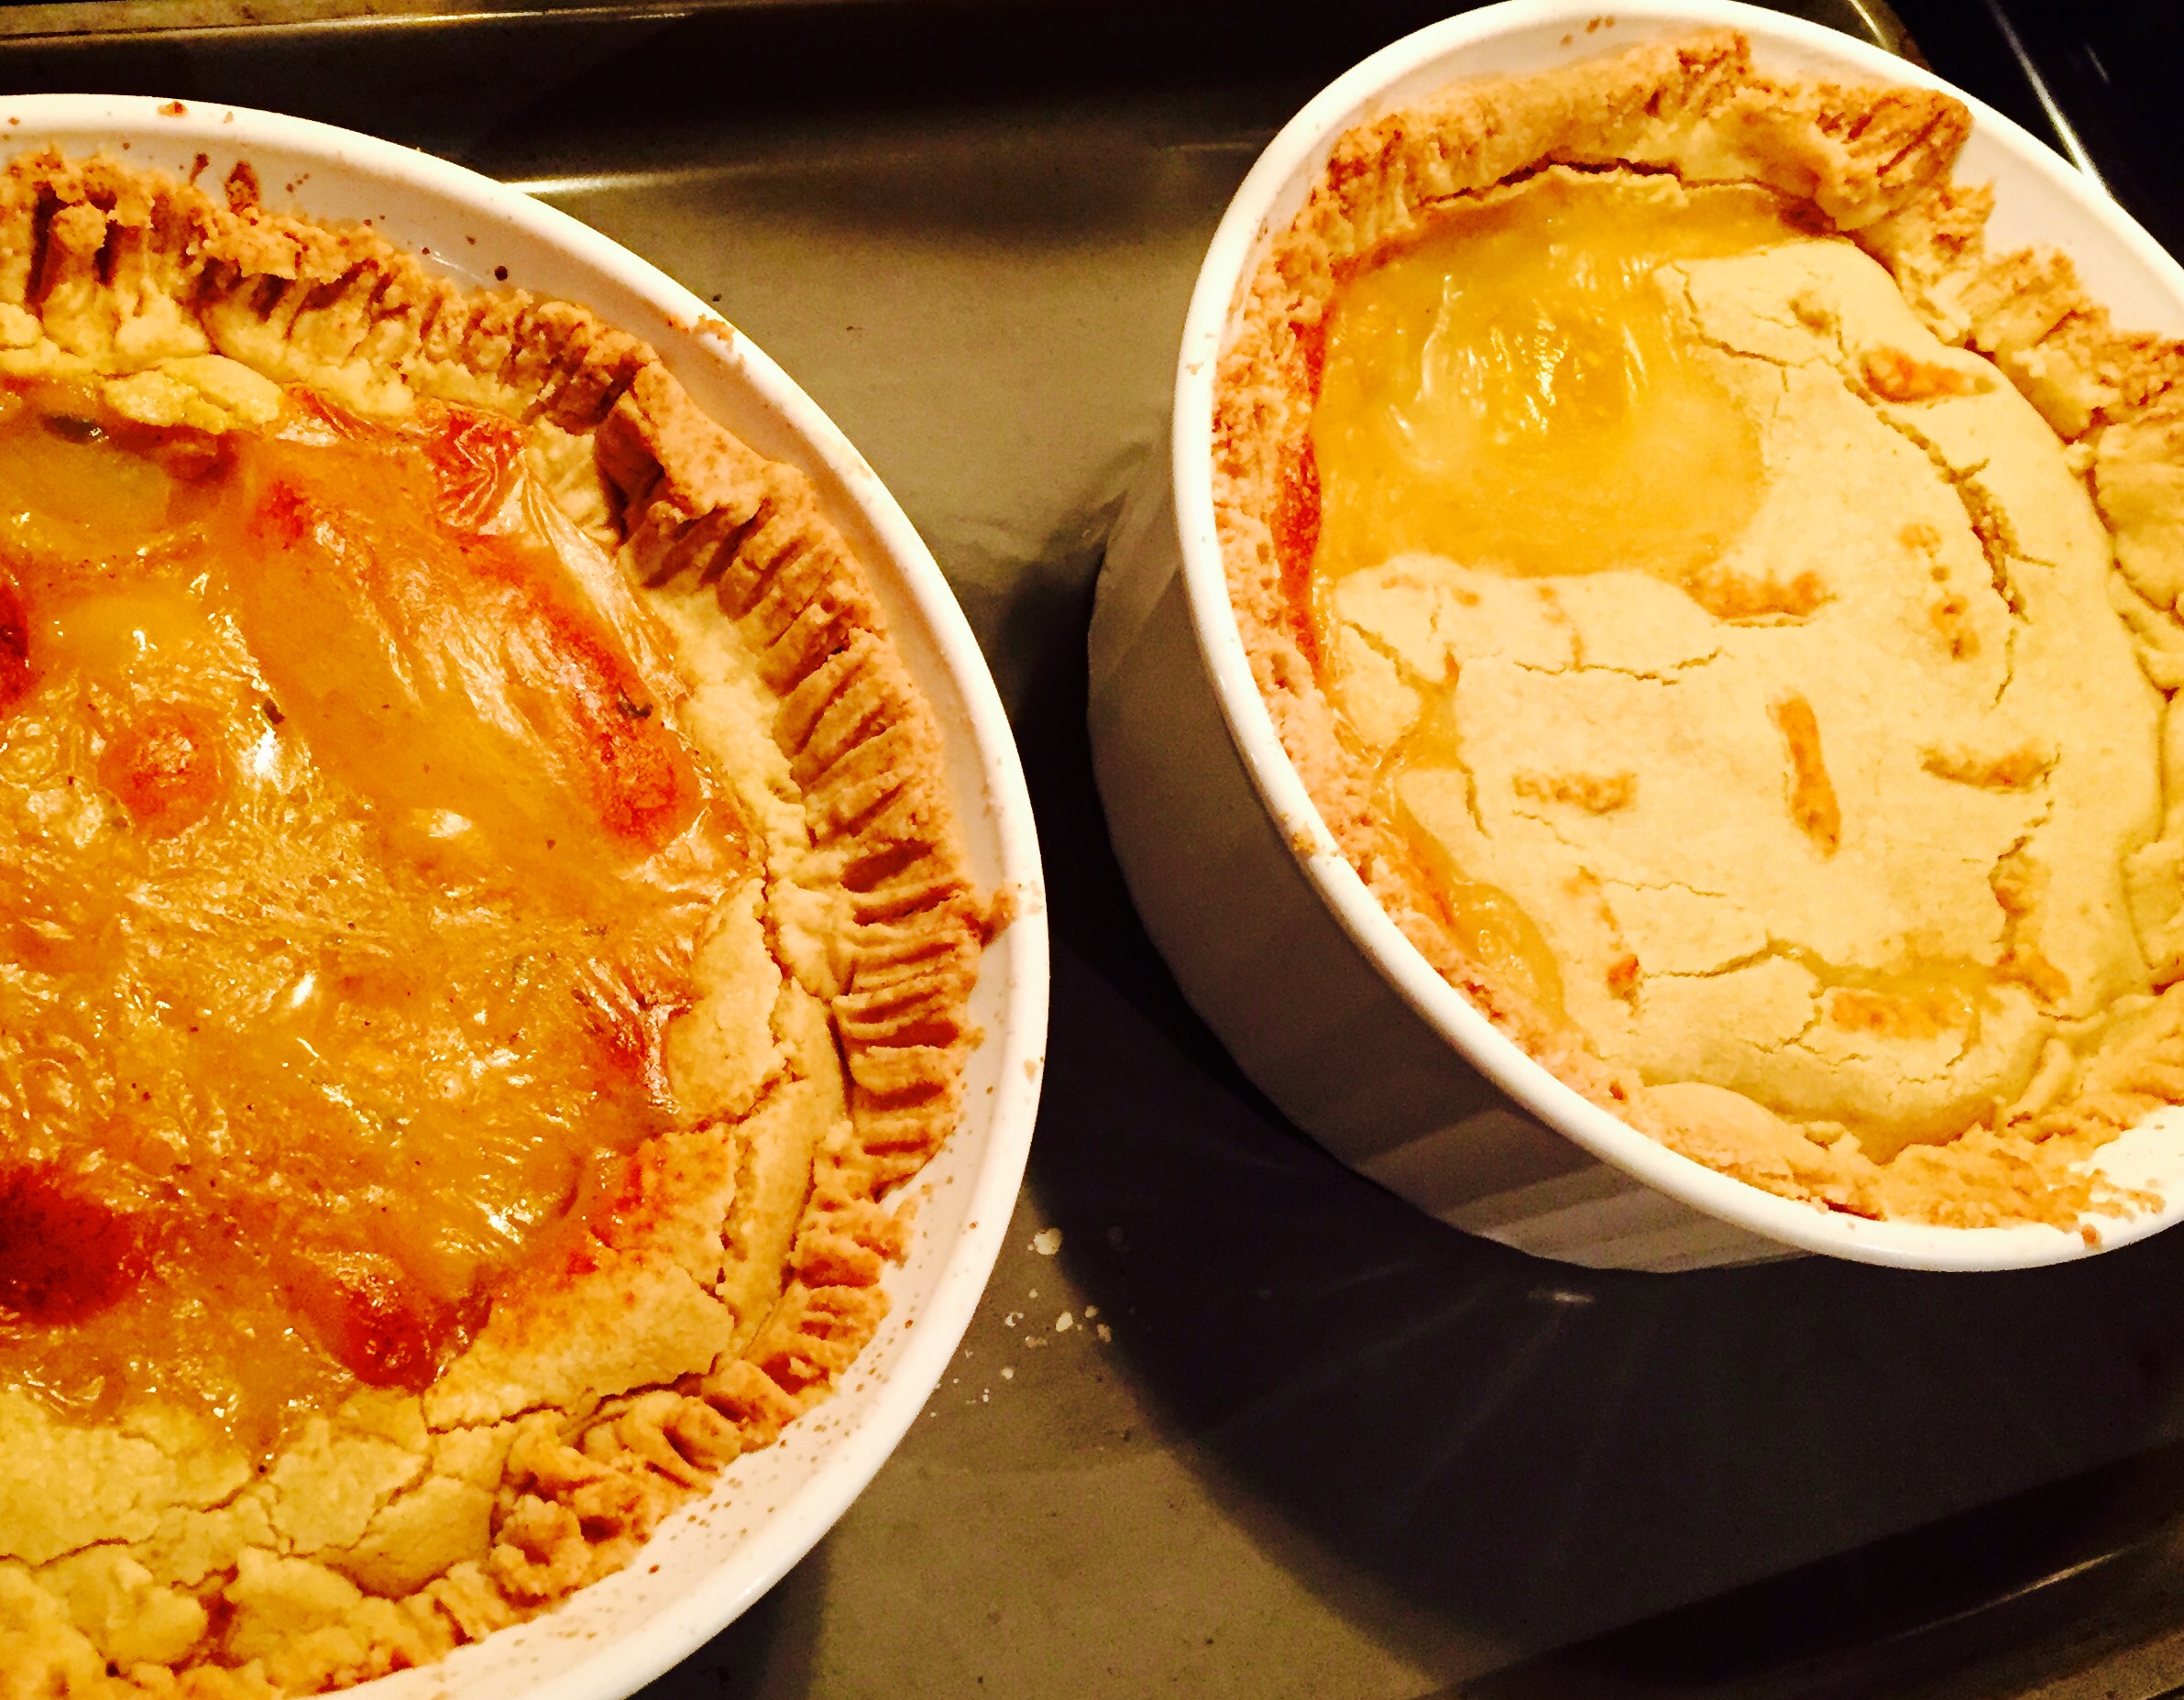 My gluten free chicken pot pie and seafood pot pie both still bubbling from the hot oven